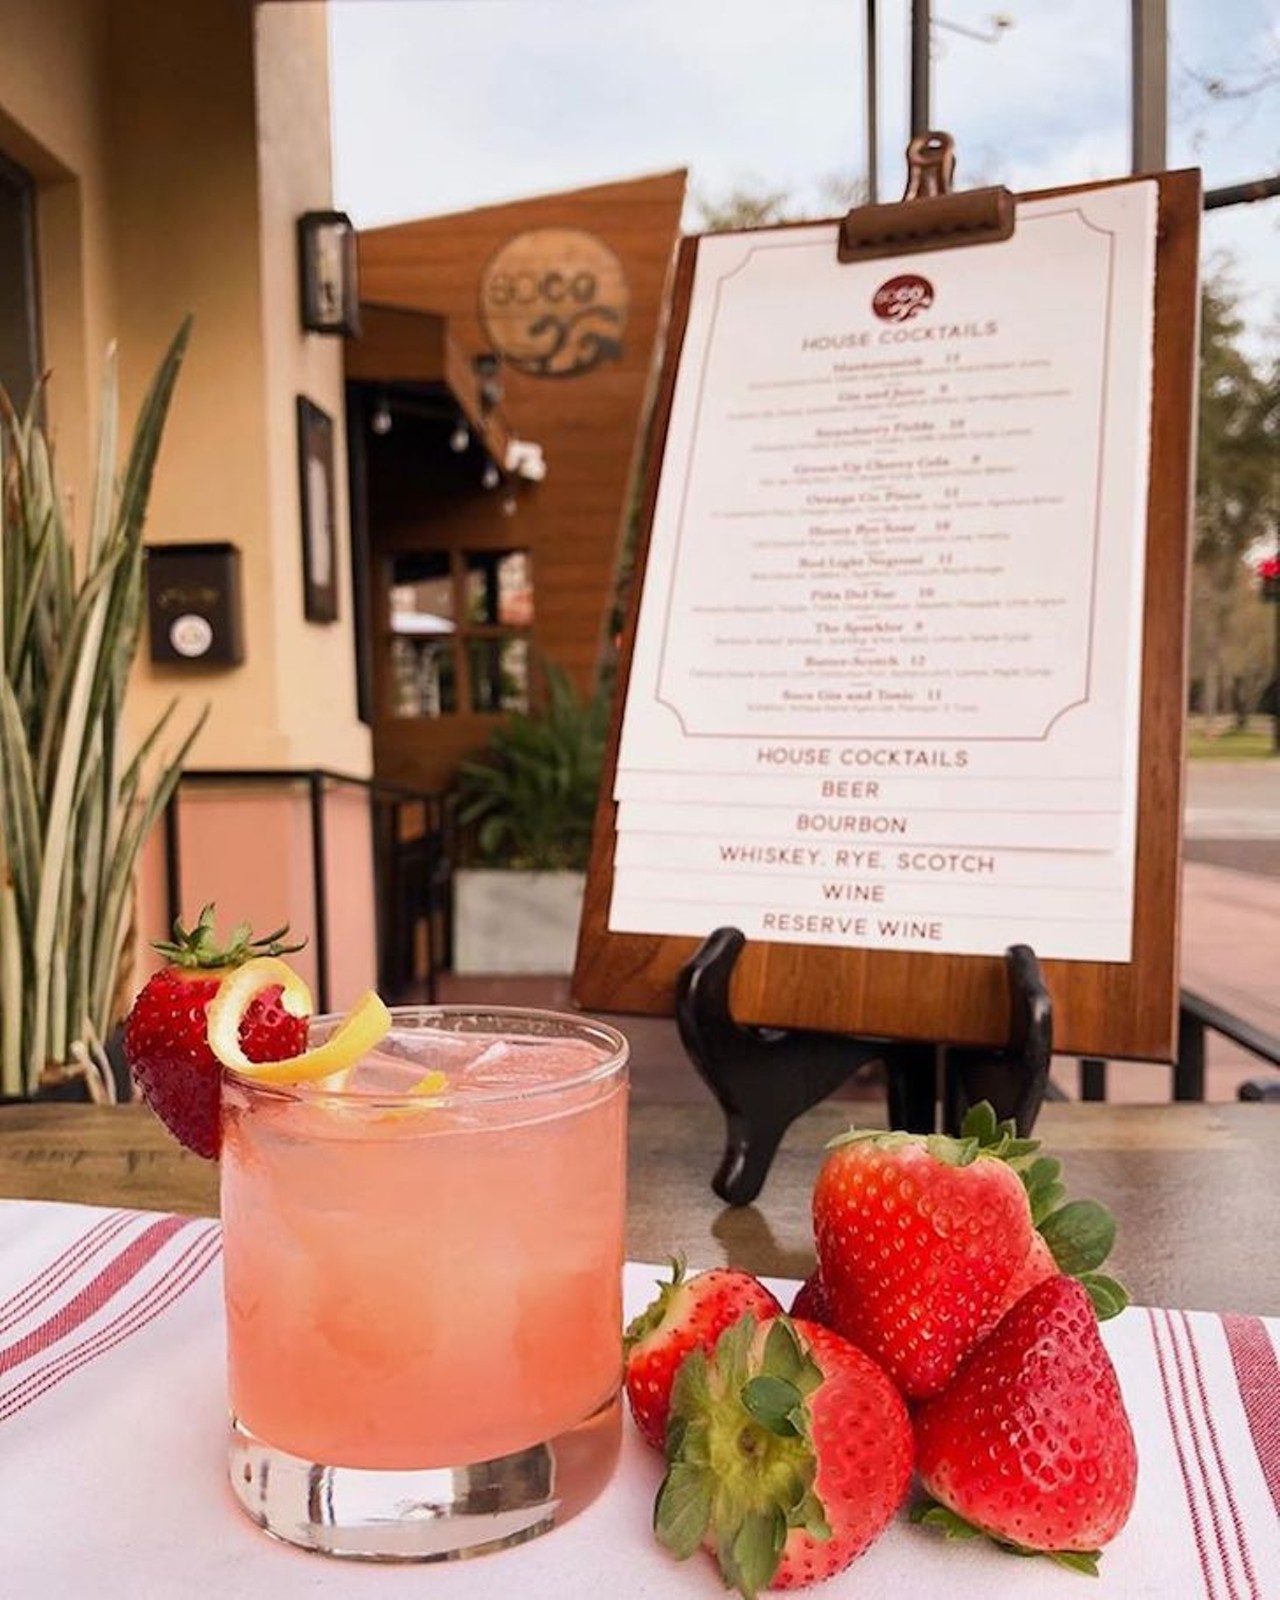 Sixty Vines 
110 Orlando Ave., Winter Park, 407-410-8005
Sixty Vines is whipping up delicious Mother&#146;s Day Kits. Brunch or Dinner options are up for grabs, serves four or more. Call or or direct message on Facebook to pre-order.
Photo via Sixty Vines/Facebook